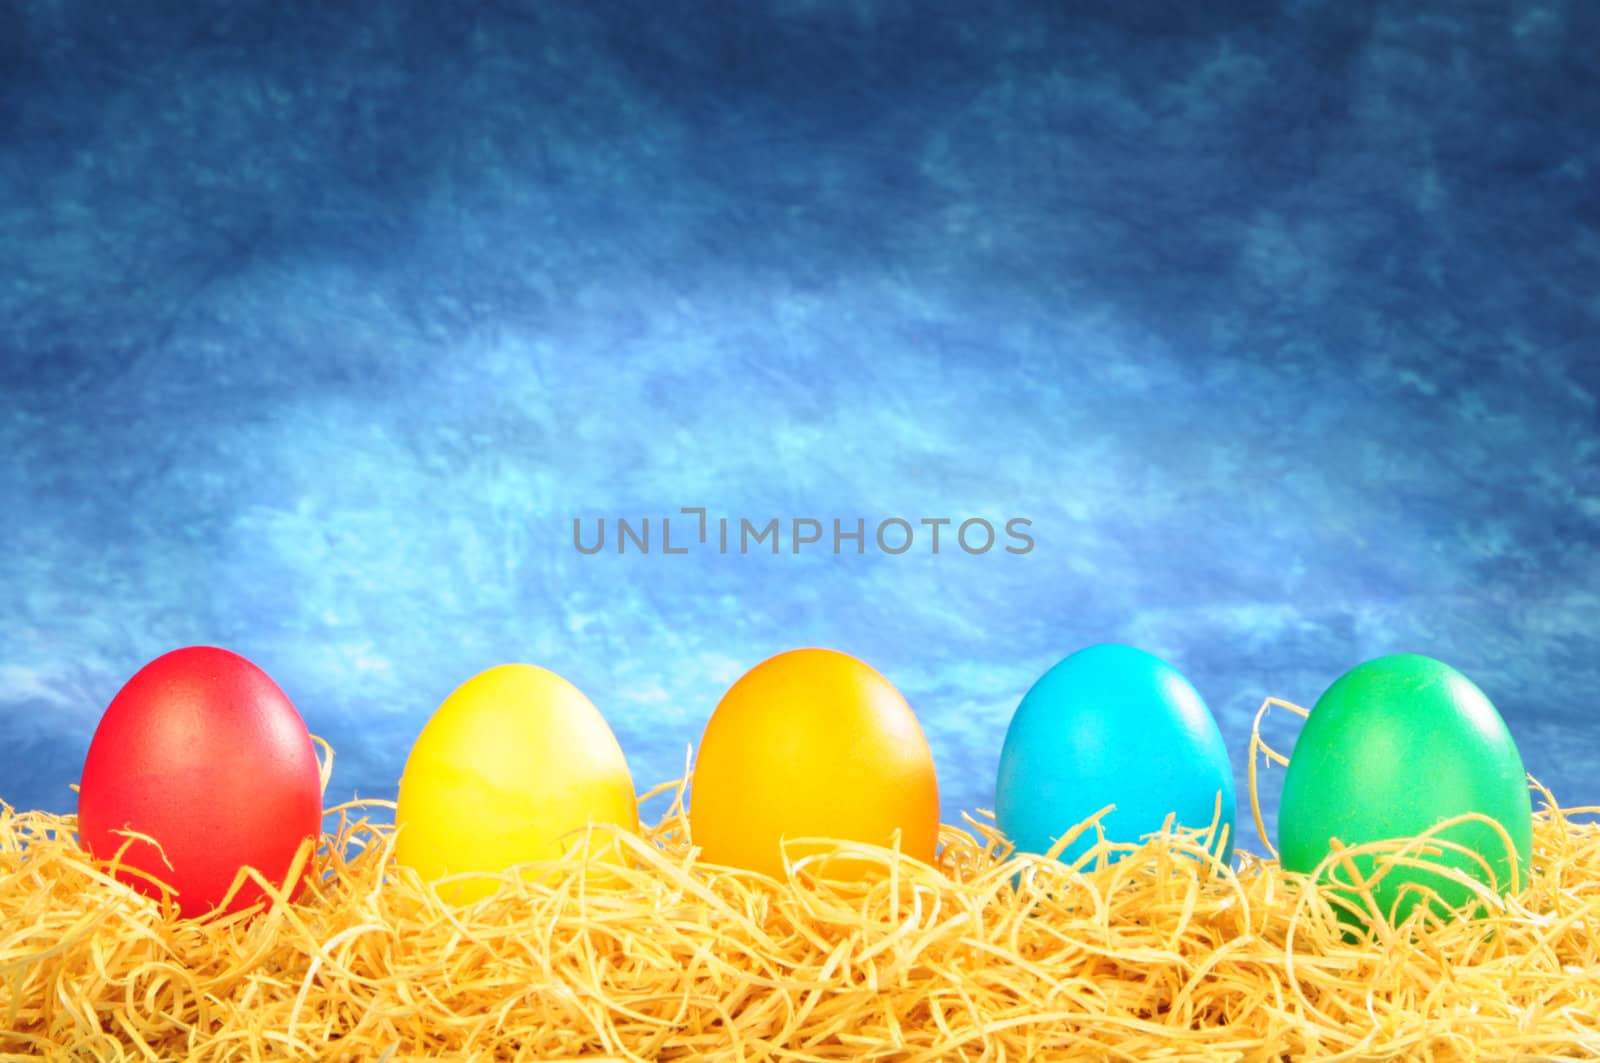 five painted eggs on a straw on a blue background